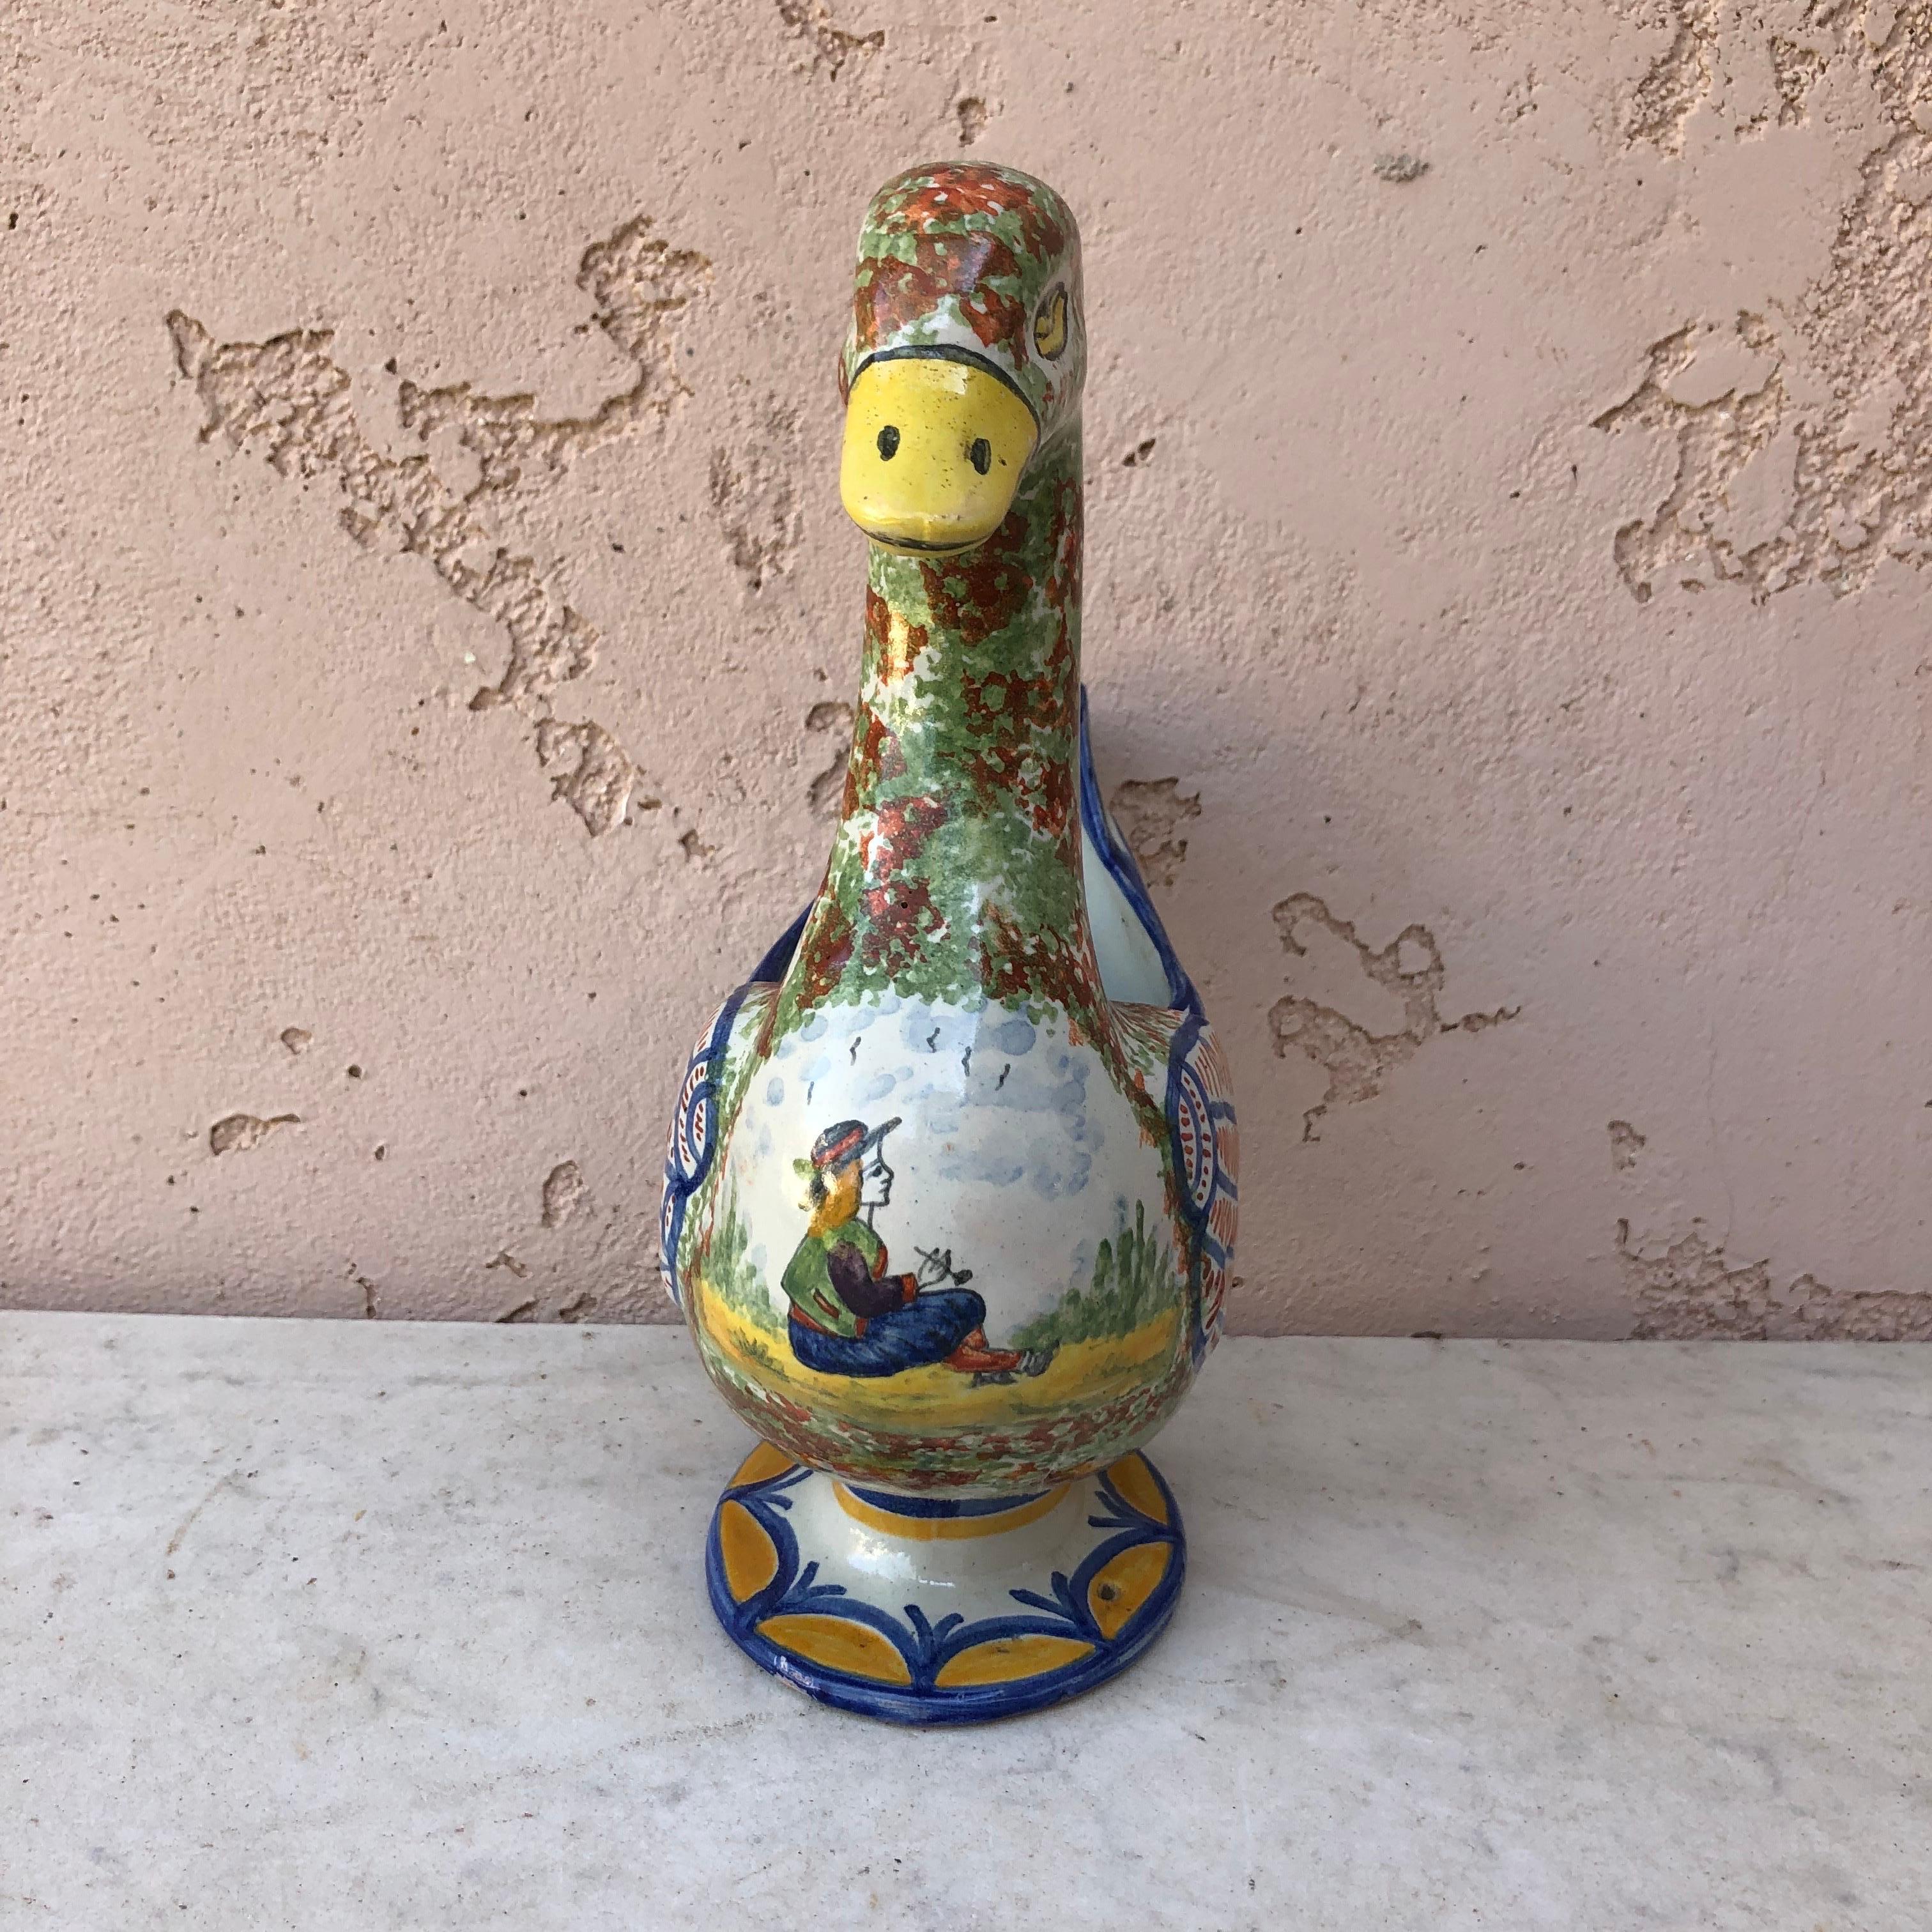 Unusual French Faience duck vase signed HB Quimper Hubaudiere, circa 1880.